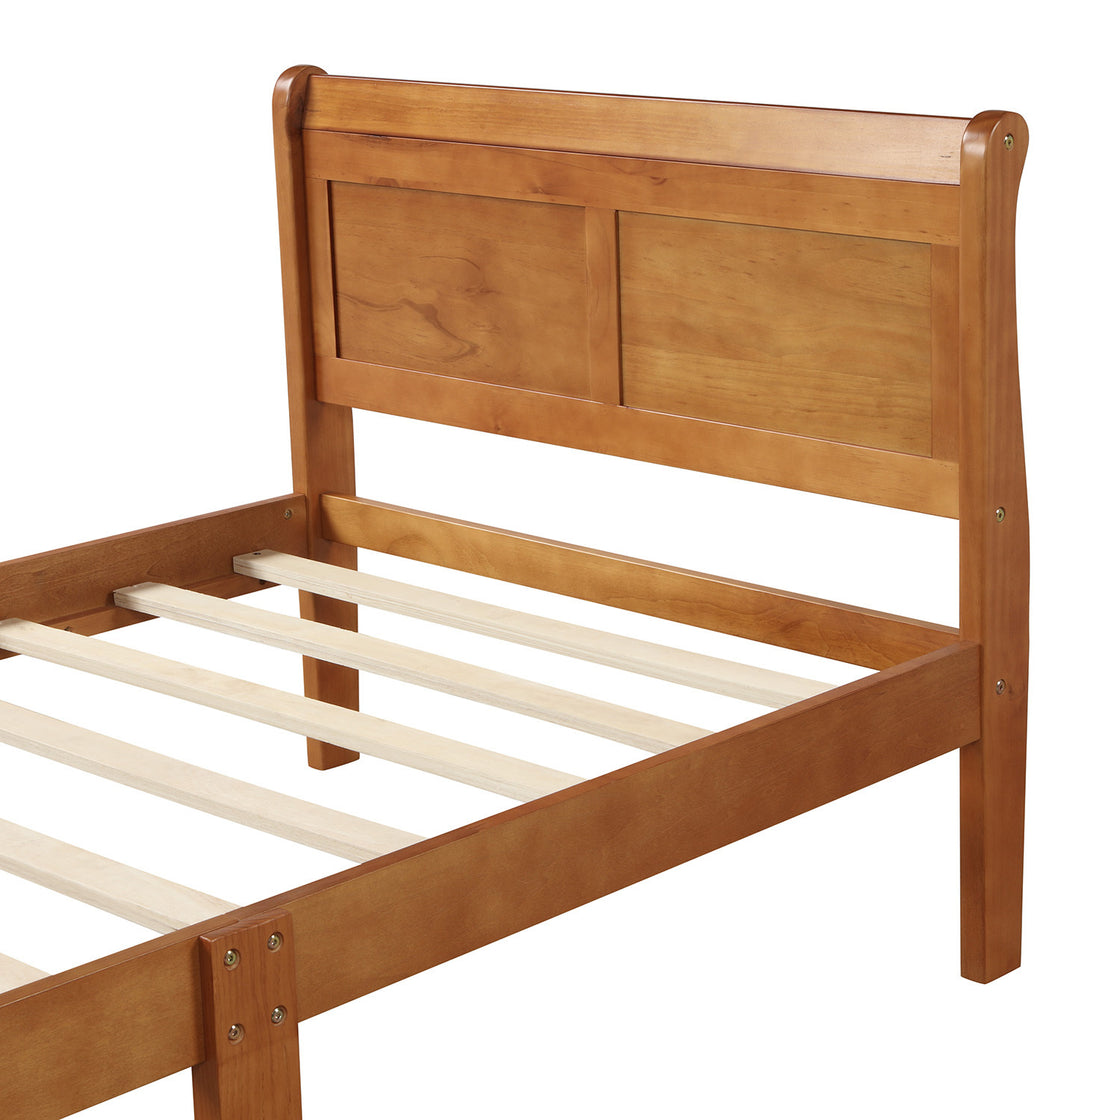 Twin Bed Wood Frame